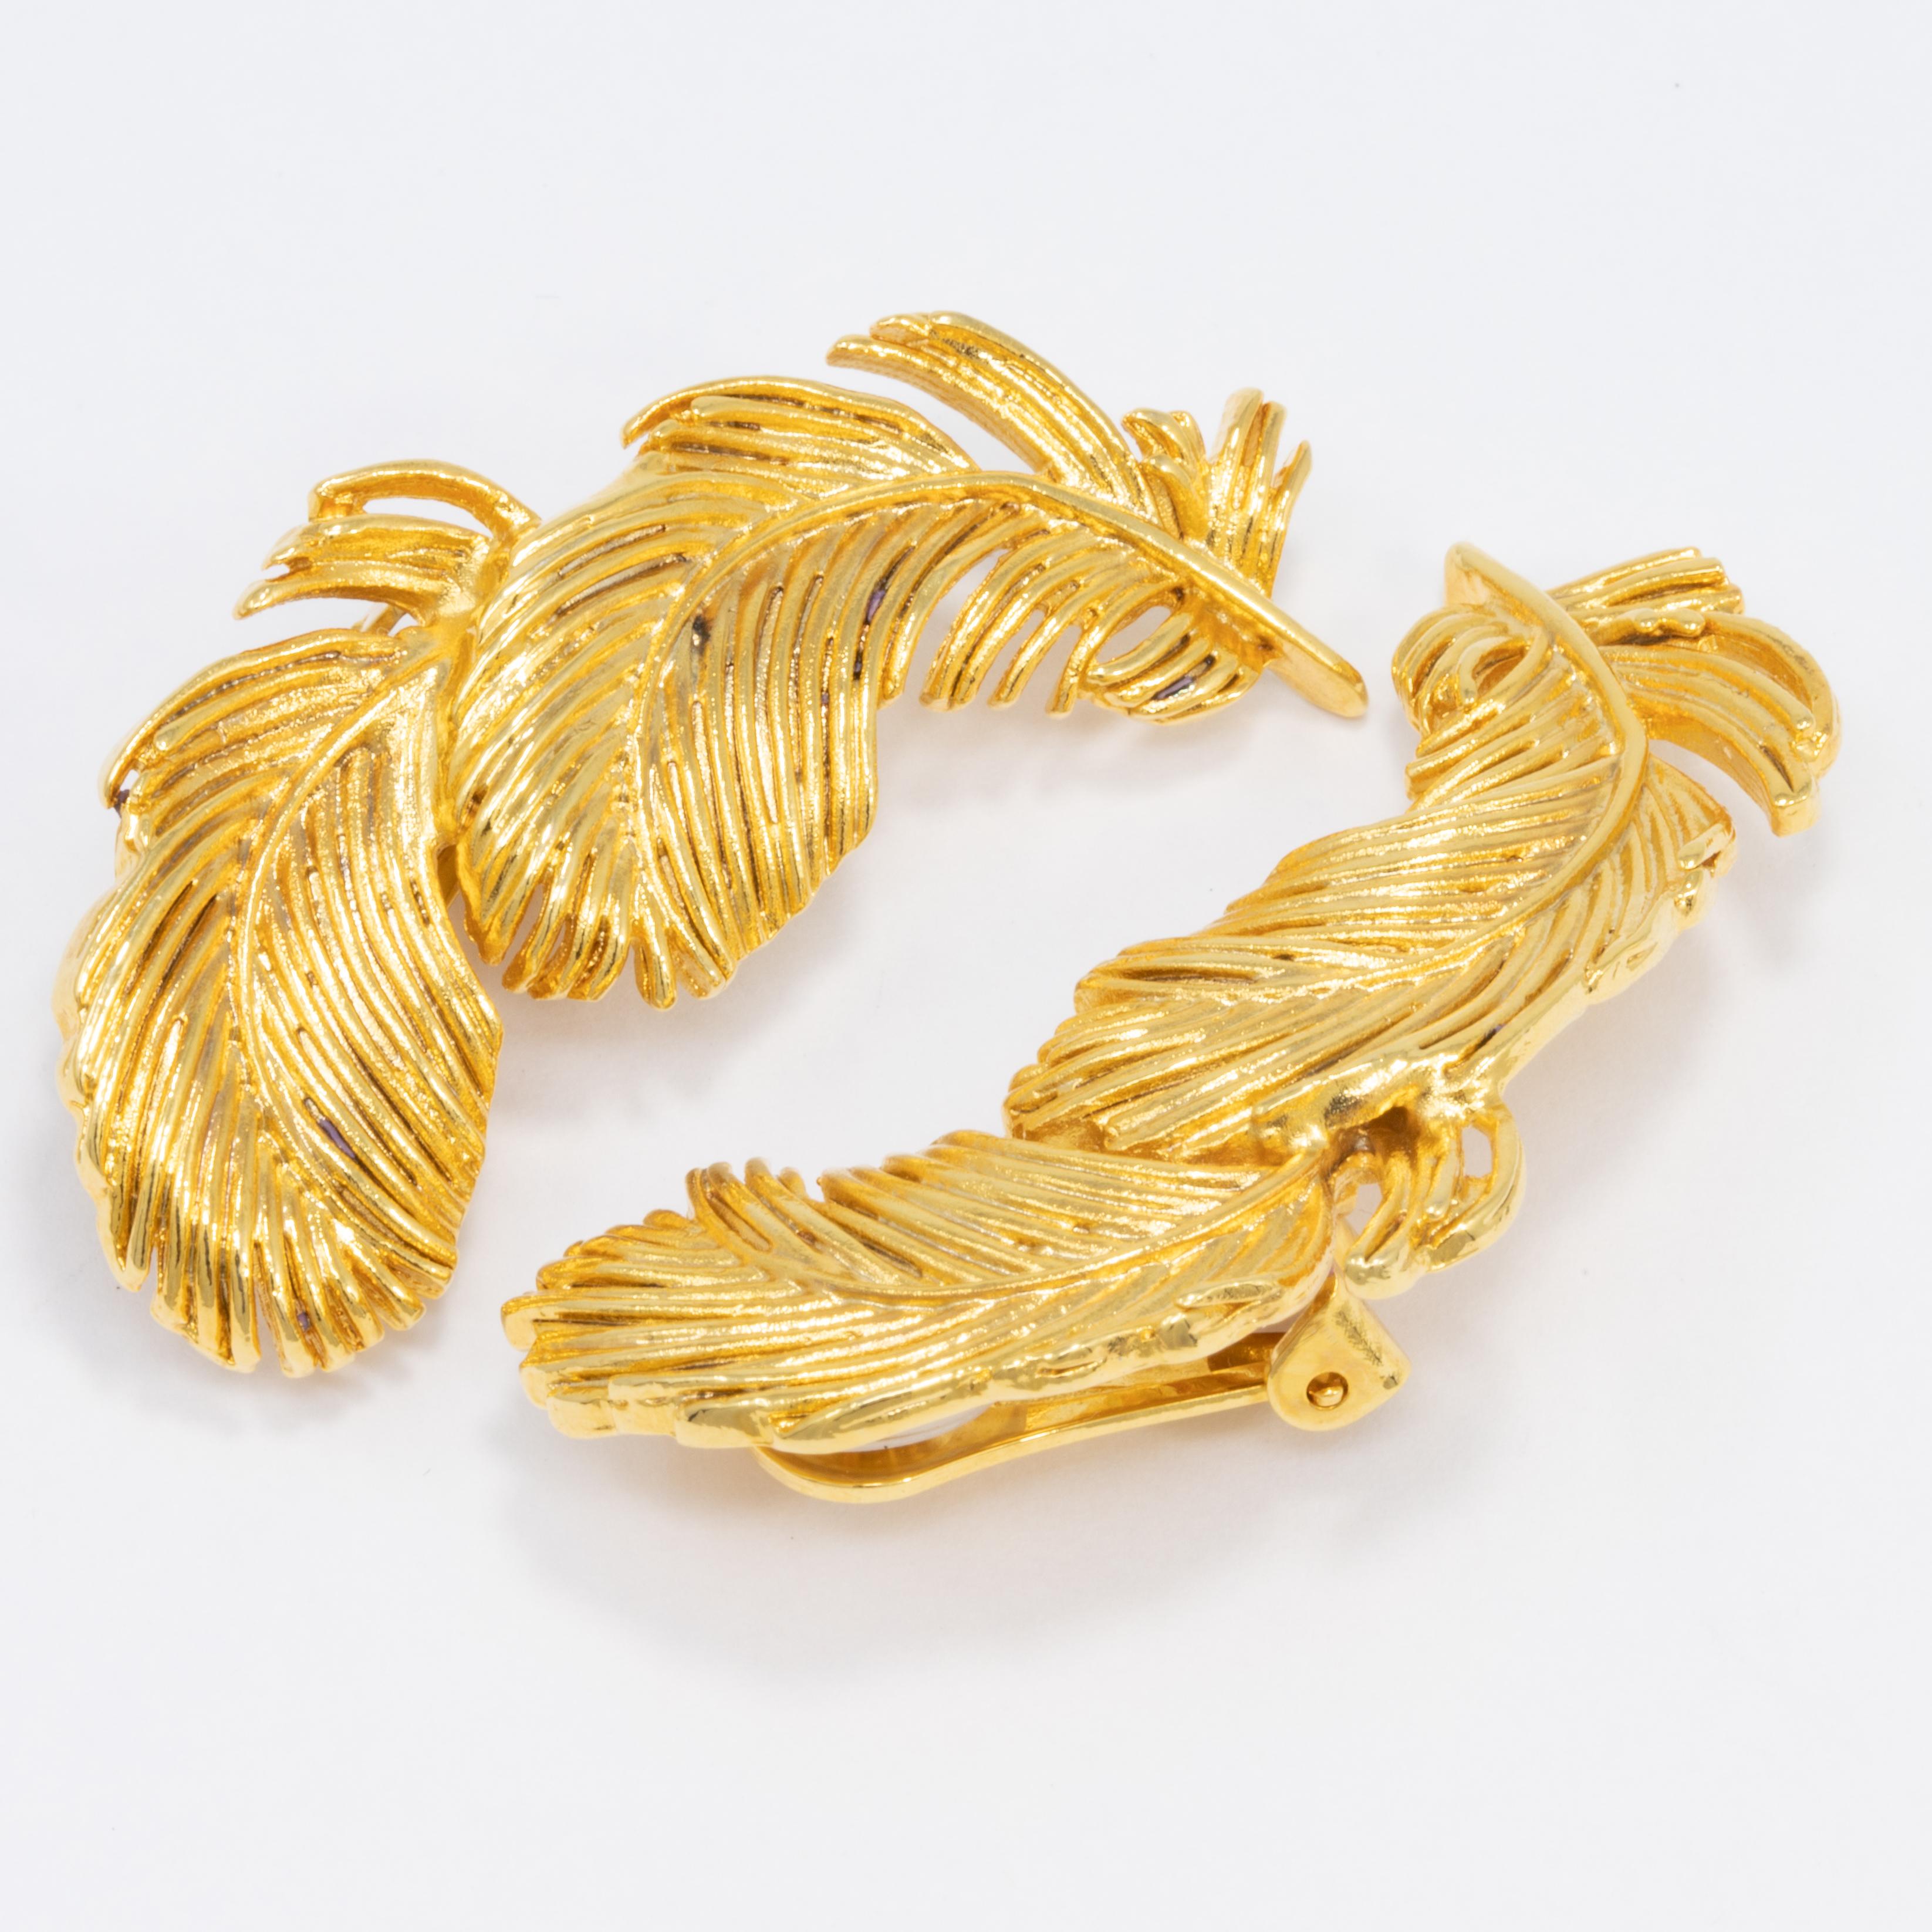 A pair of golden plume earrings by Kenneth Jay Lane, featuring exquisite golden feathers.

Hallmarks: KJL

Gold plated.